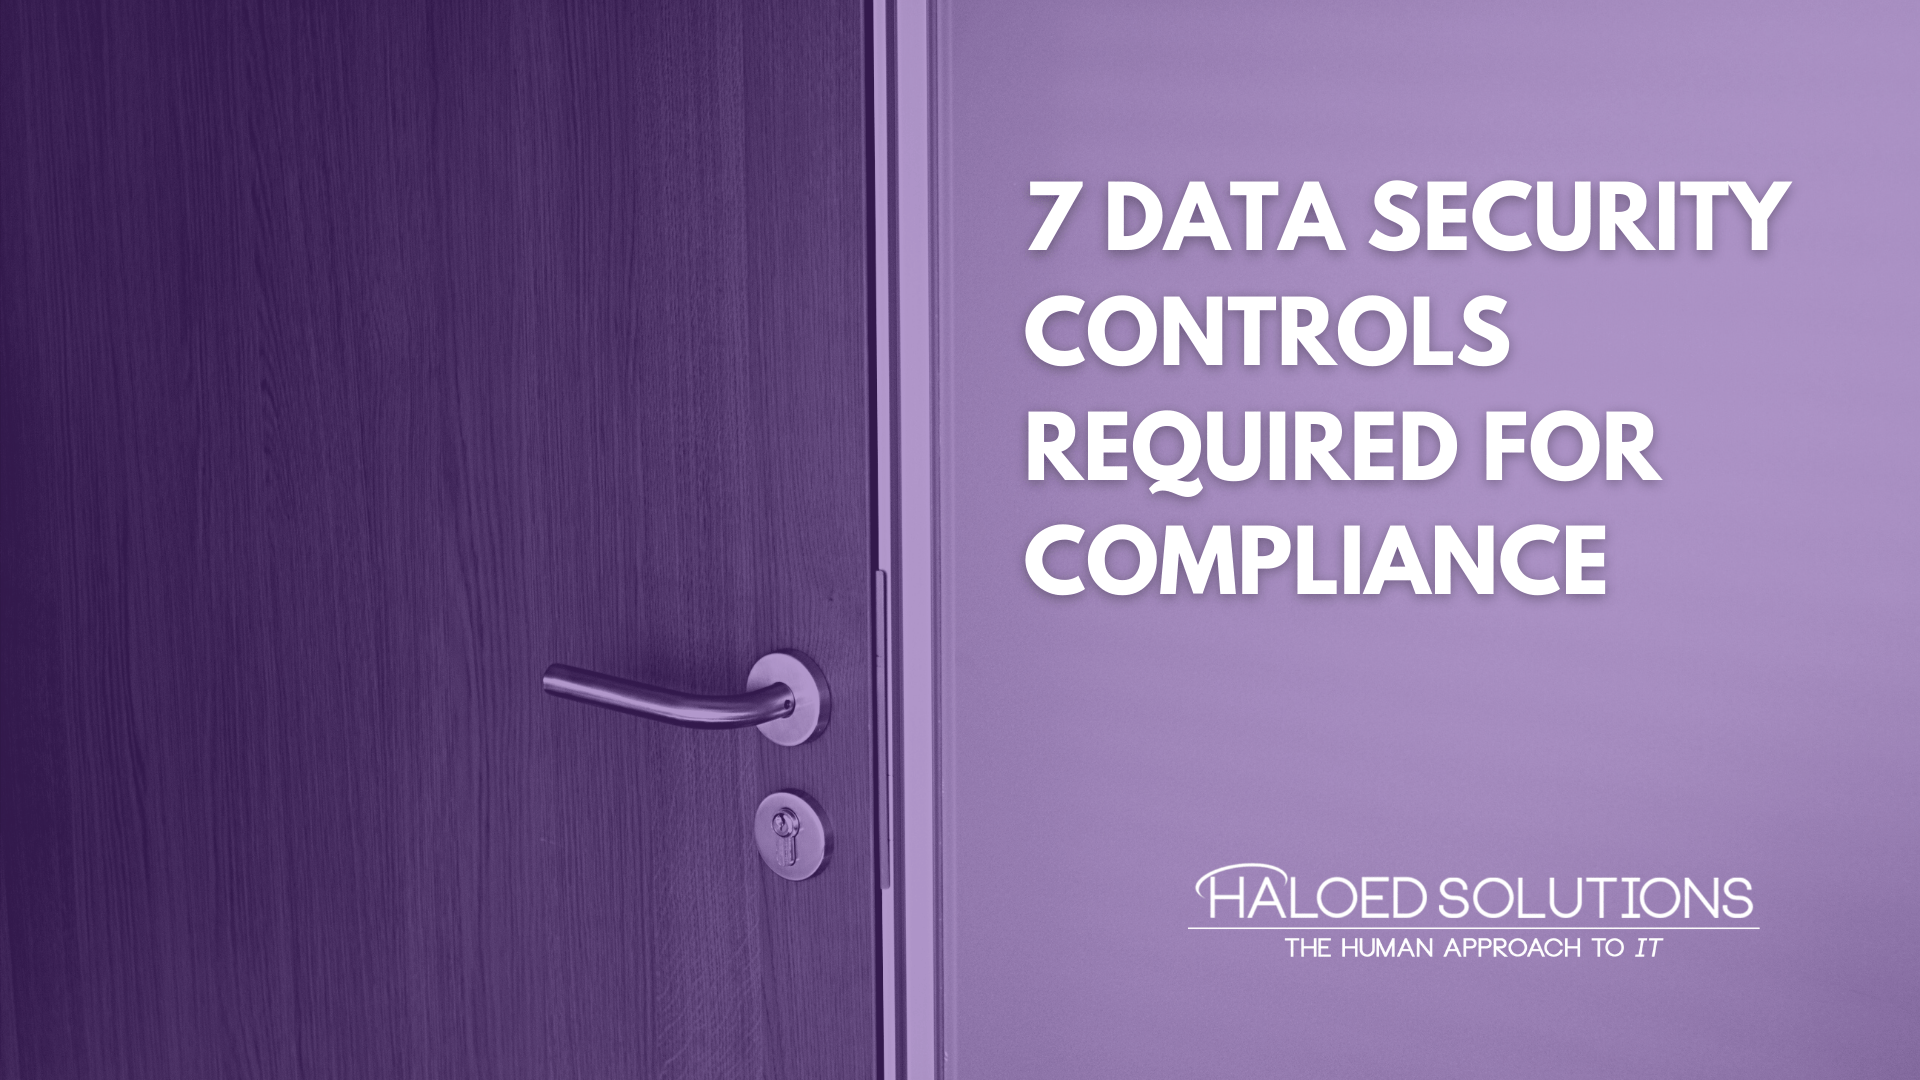 7 Data Security Controls Required for Compliance